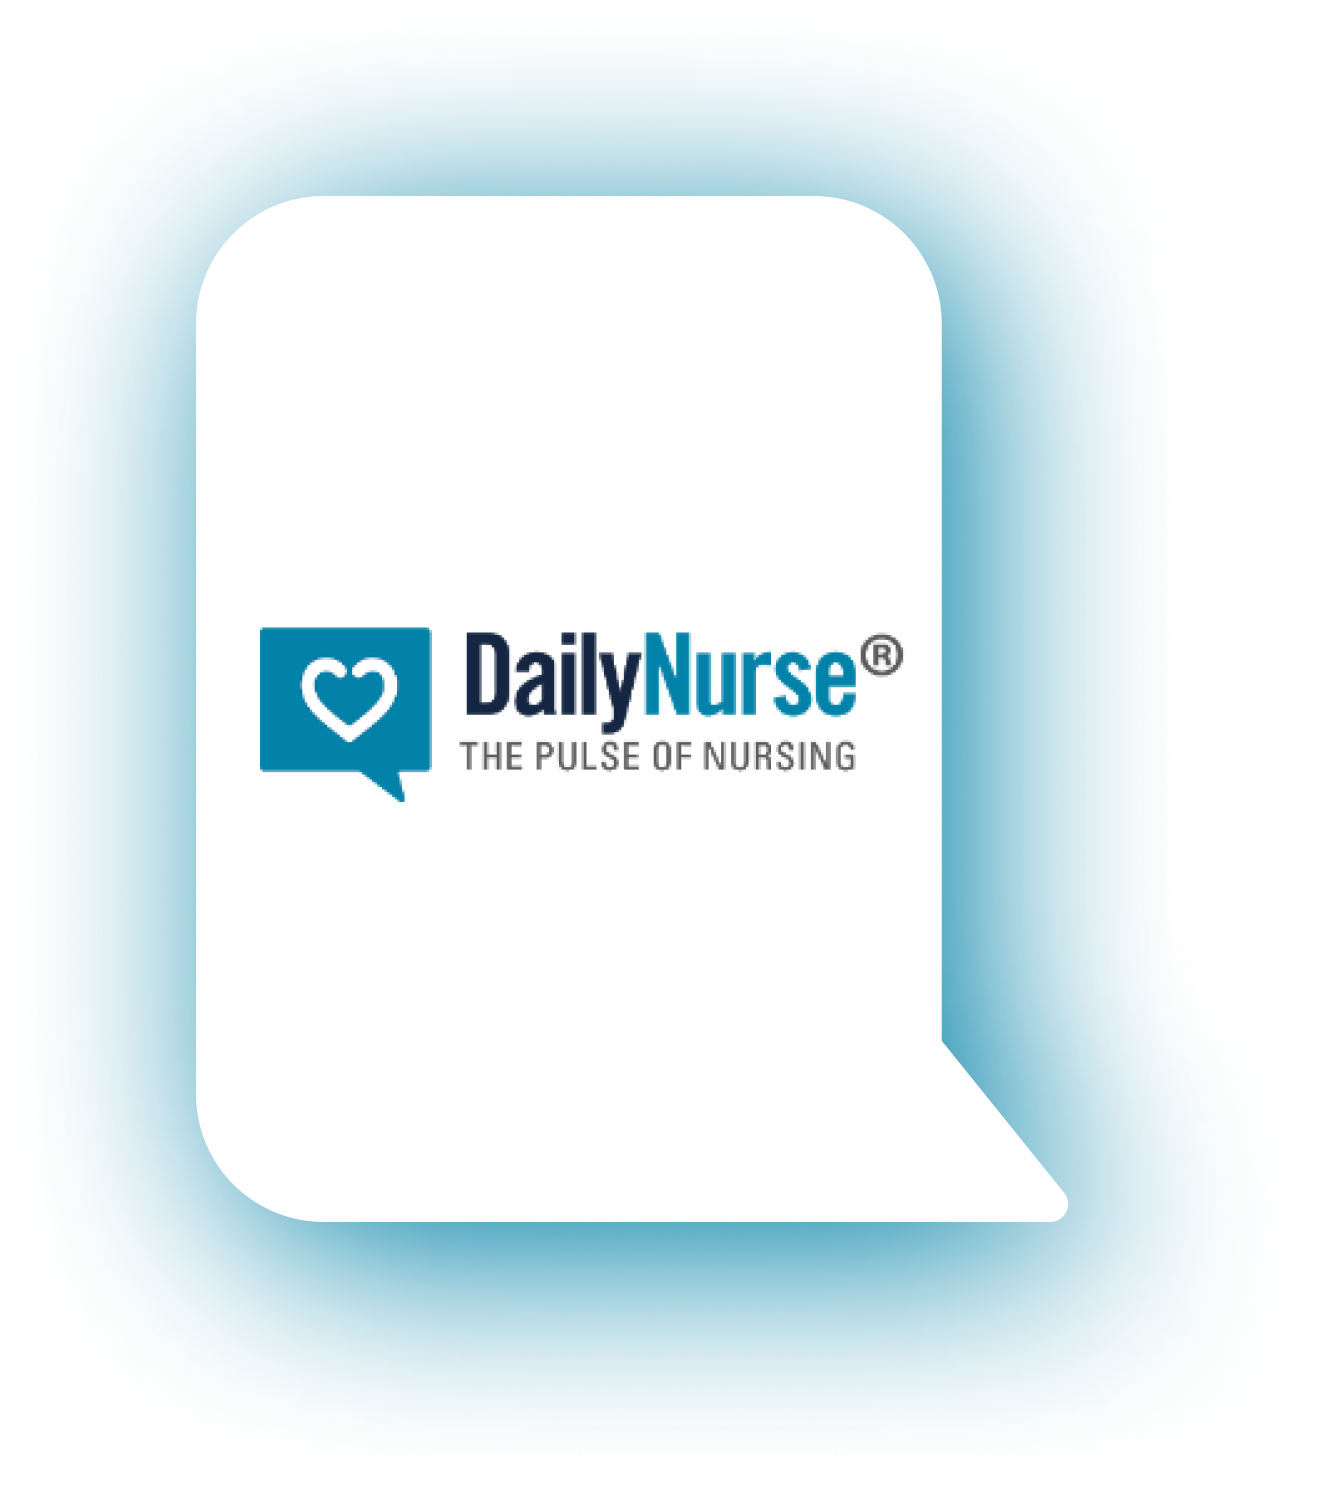 6 Keys to a Successful and Fulfilling Nursing Career